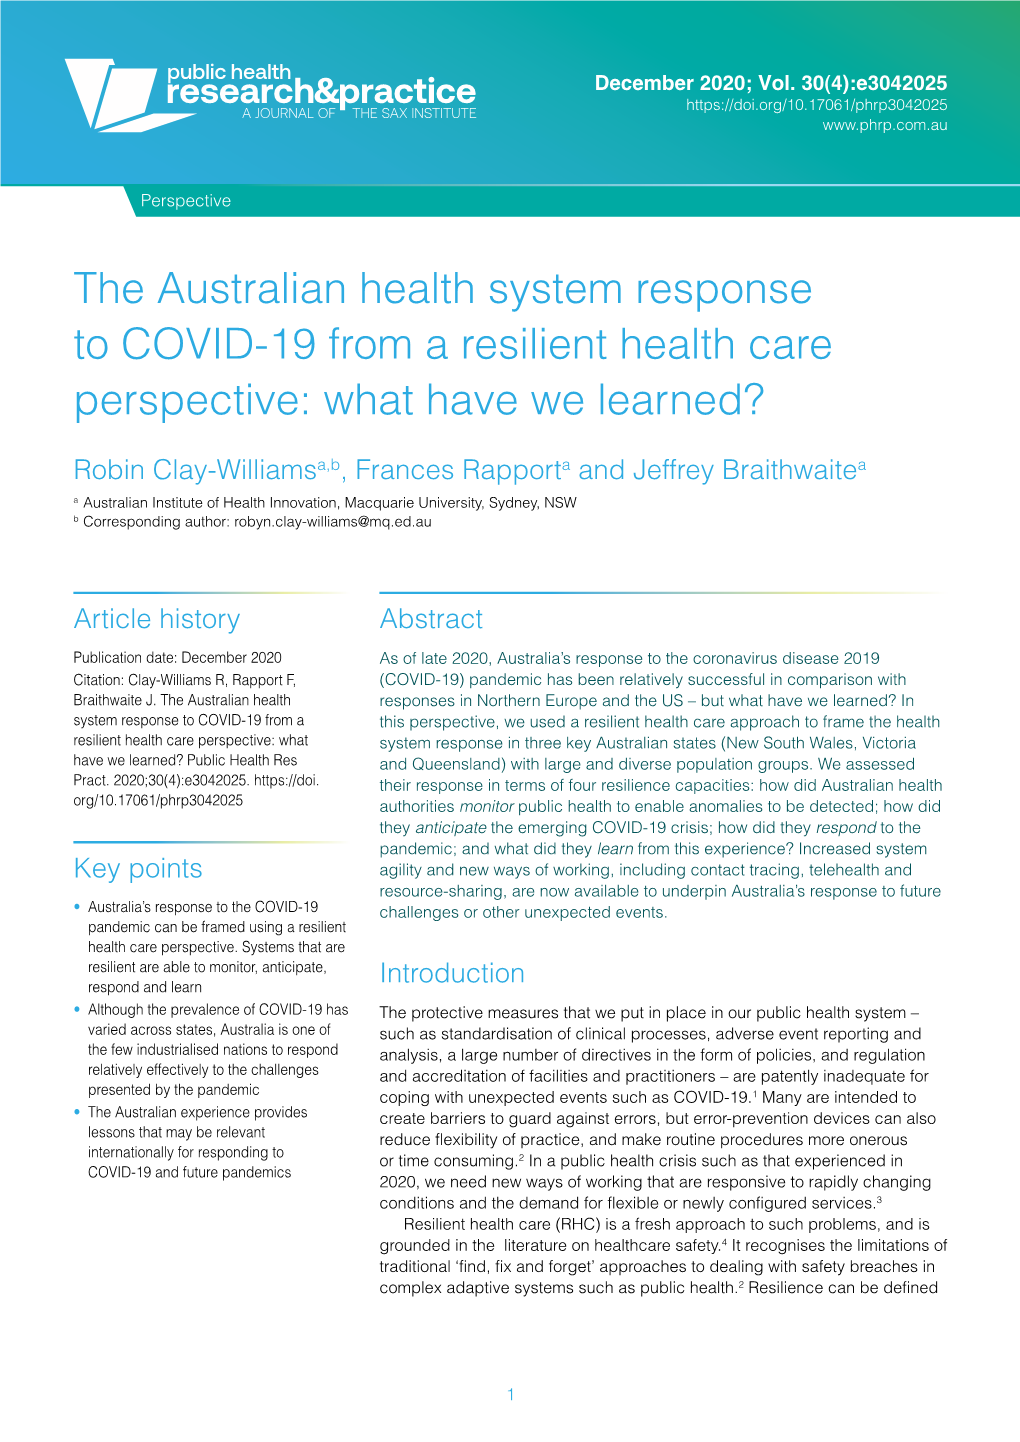 The Australian Health System Response to COVID-19 from a Resilient Health Care Perspective: What Have We Learned?